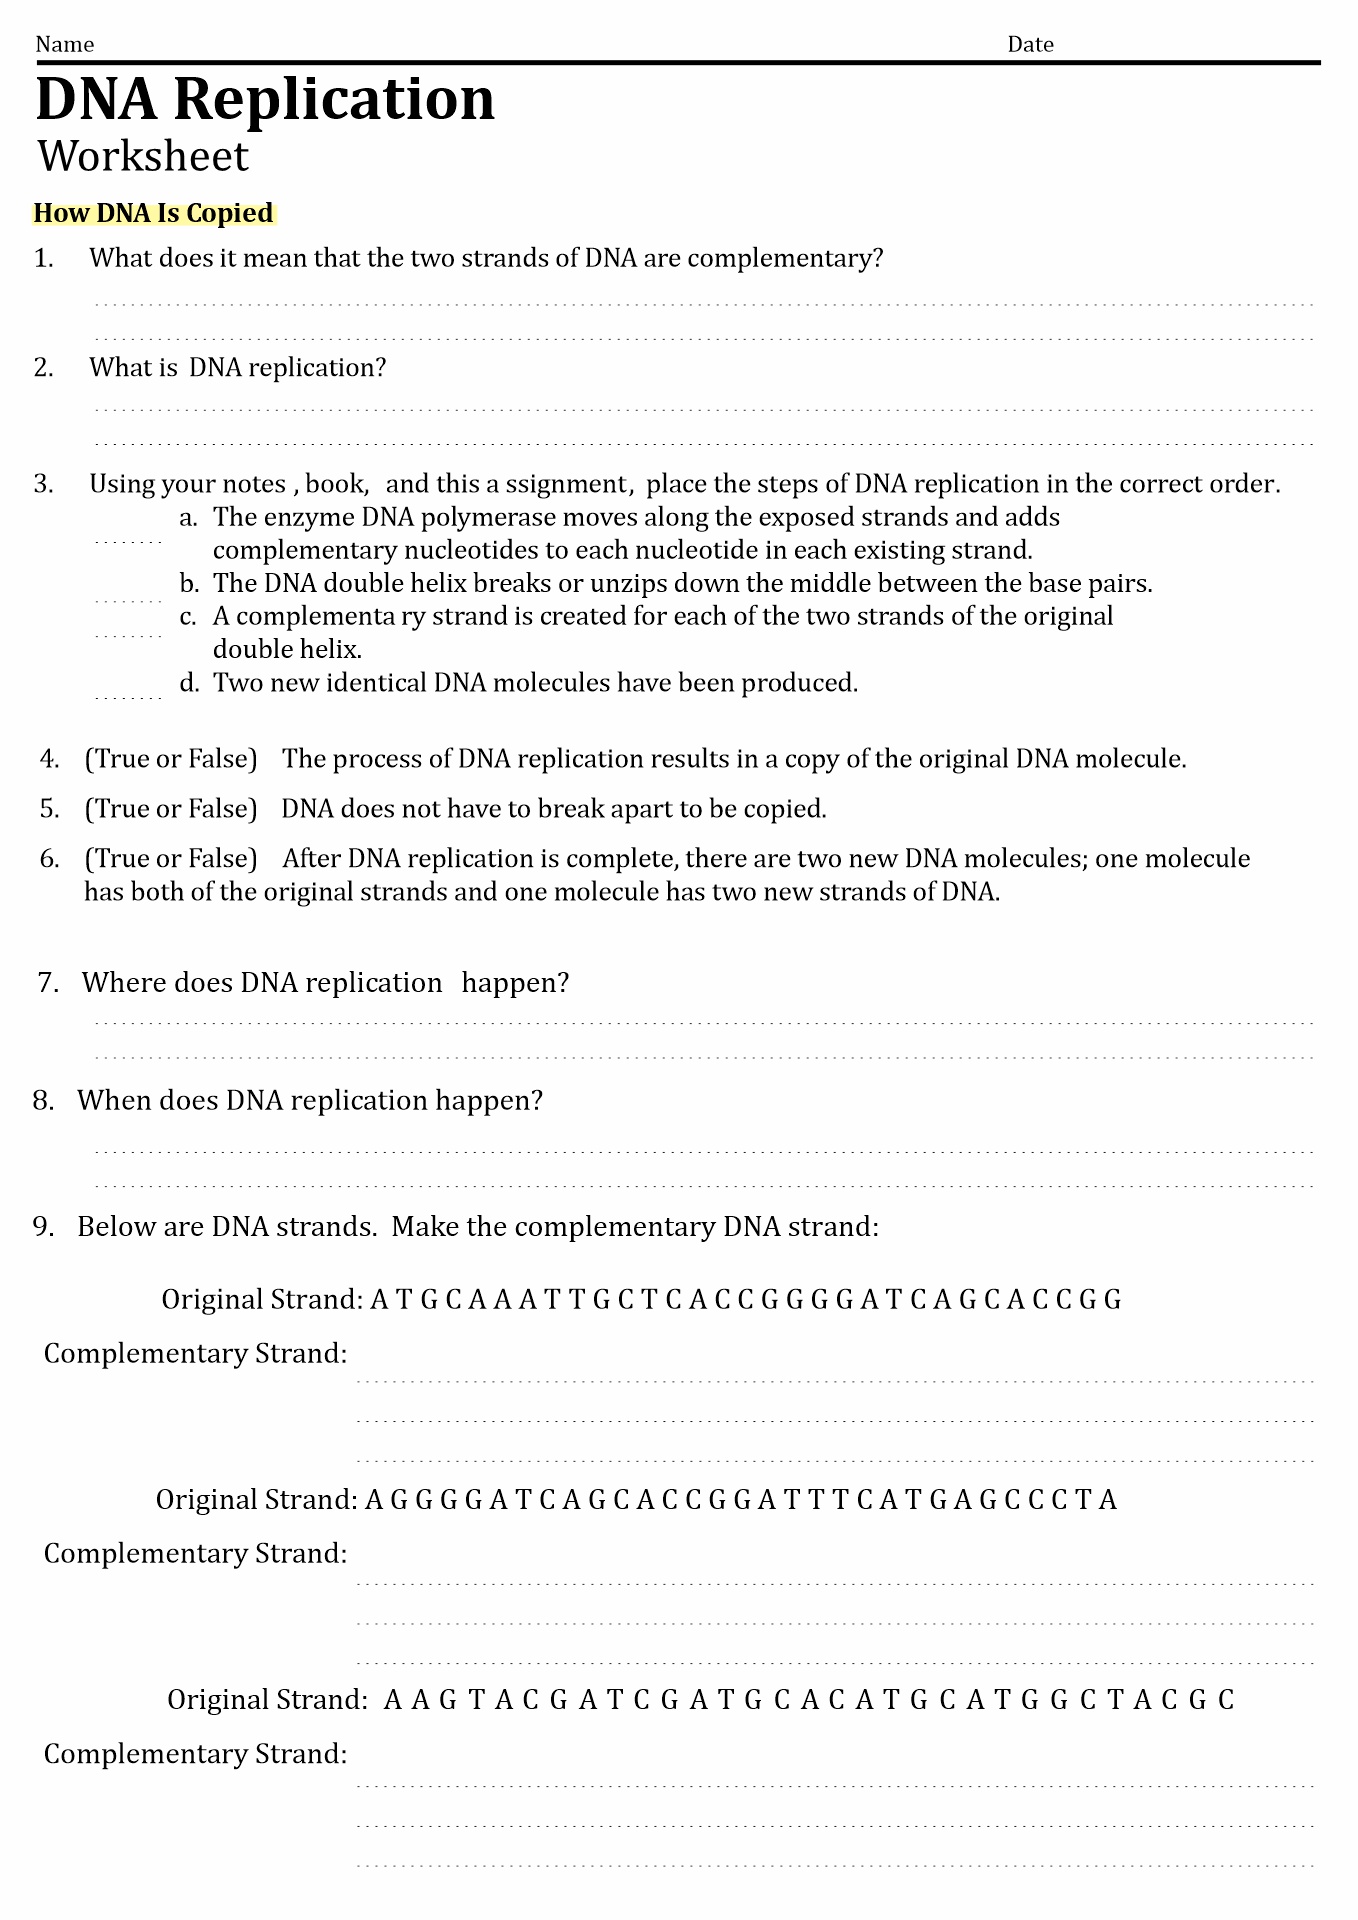 13 Best Images of DNA Code Worksheet - Protein Synthesis Worksheet